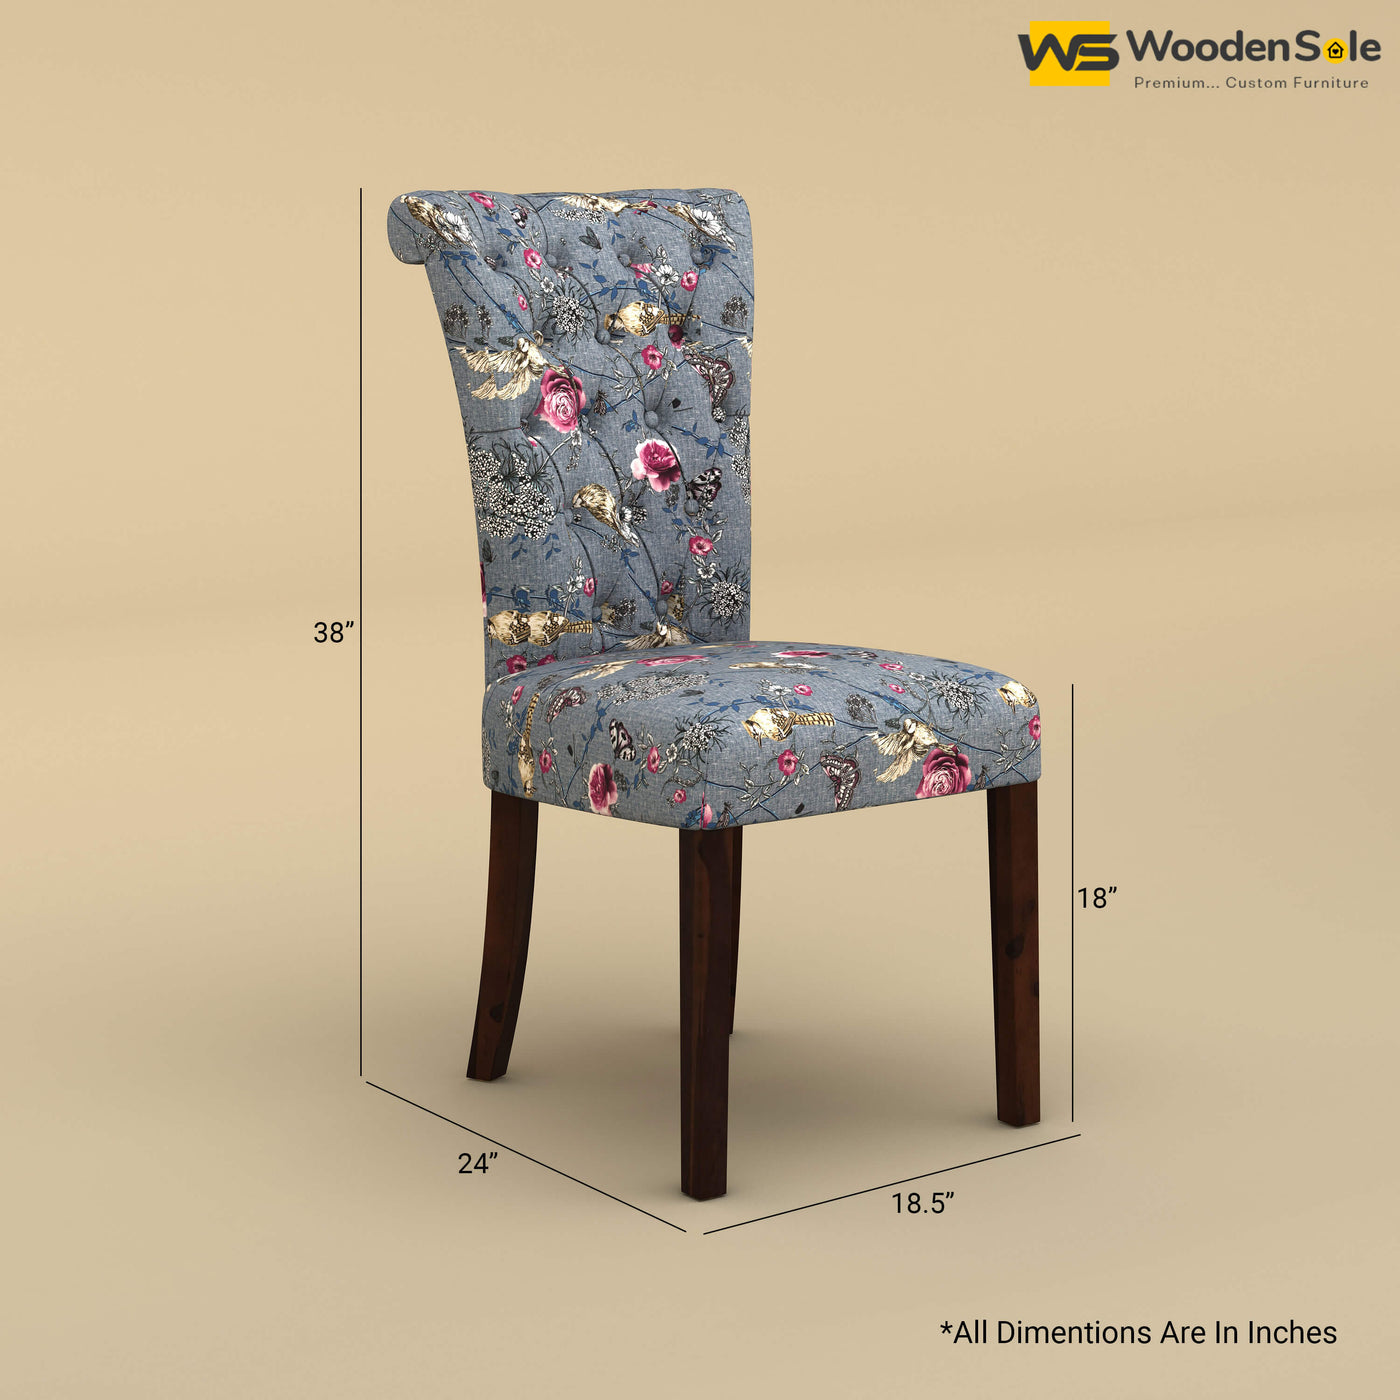 Kia Dining Chair (Cotton, Floral Printed)